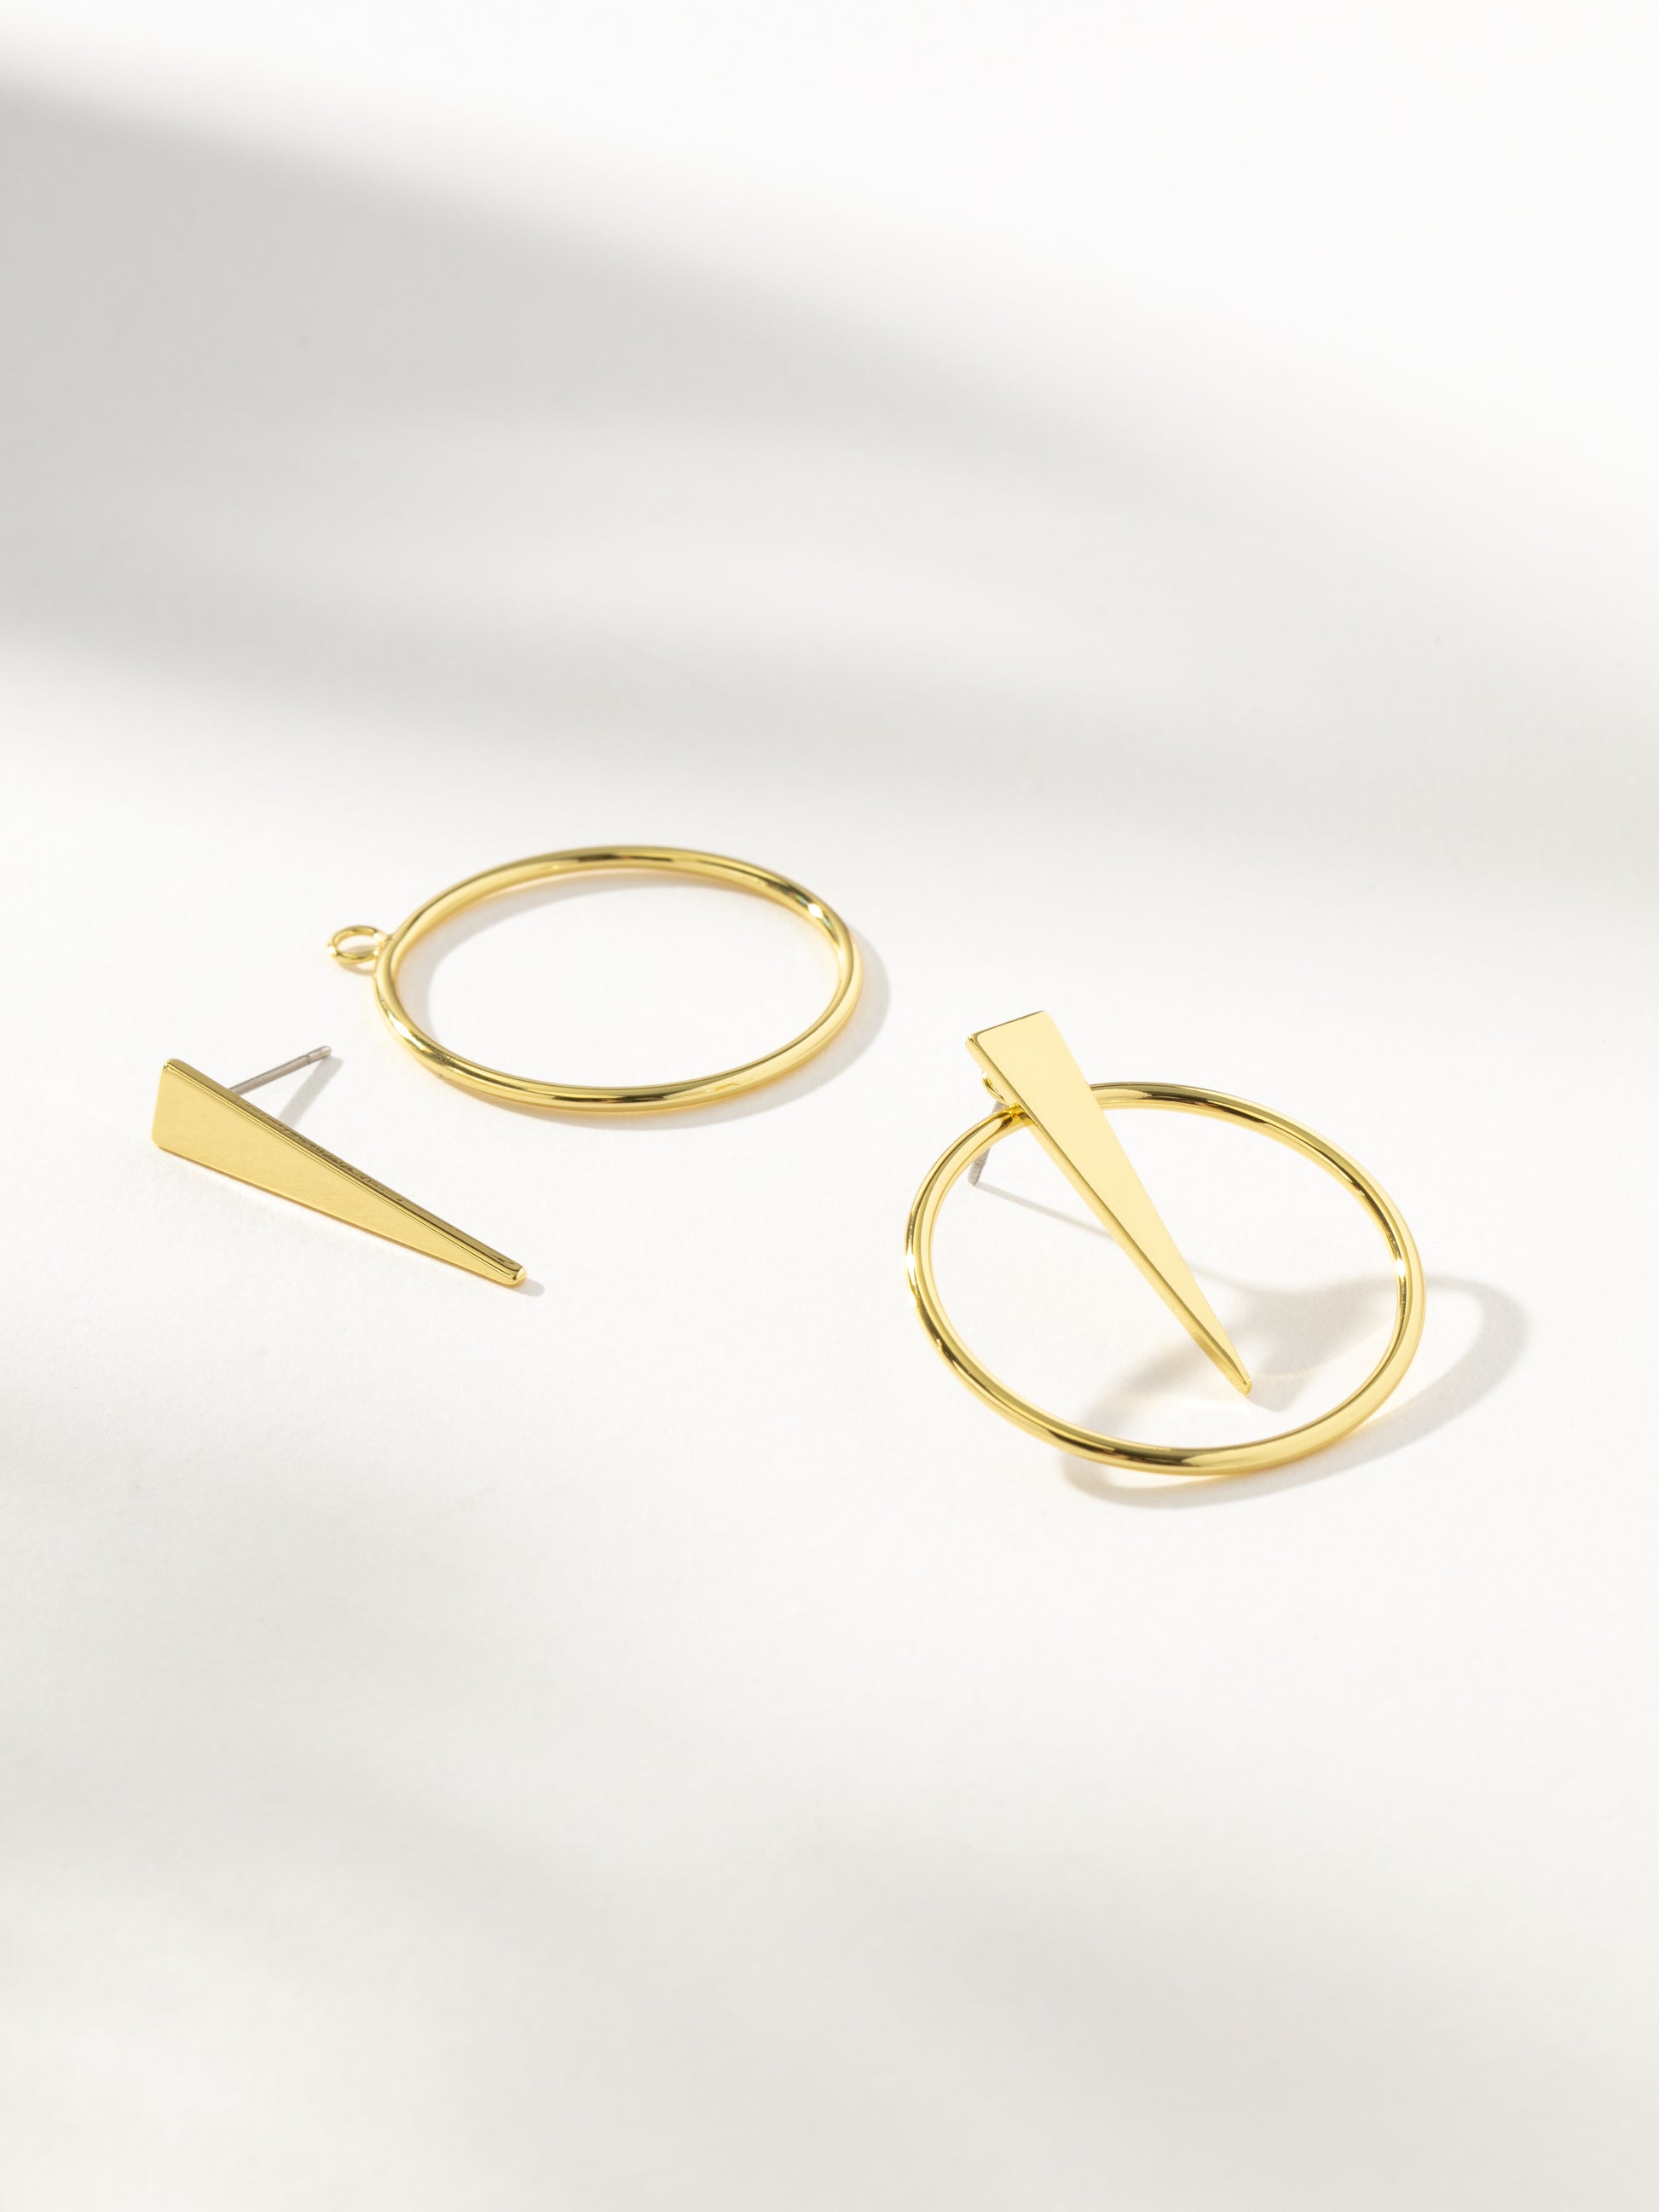 Shot in the Dark Earrings | Gold | Product Detail Image | Uncommon James